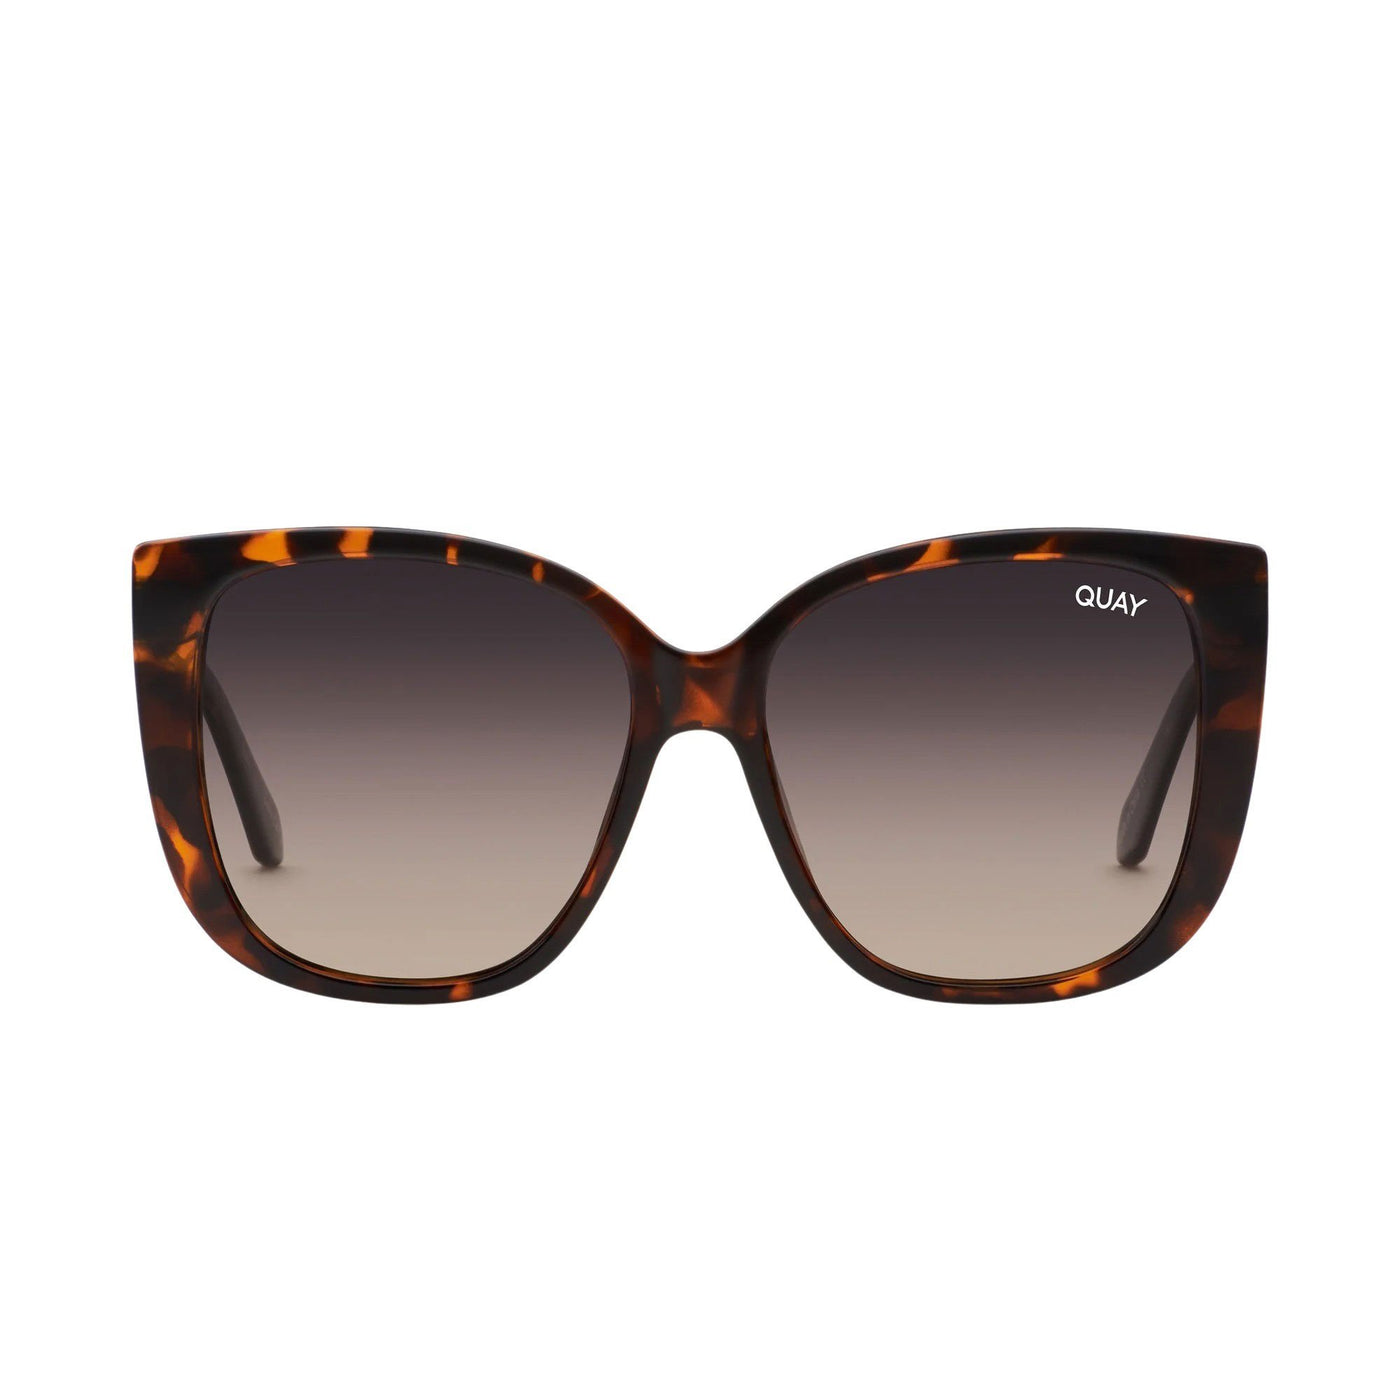 Quay Women's Ever After Oversized Cat Eye Sunglasses - Tortoise Frame/Smoke Taupe Lens - Front